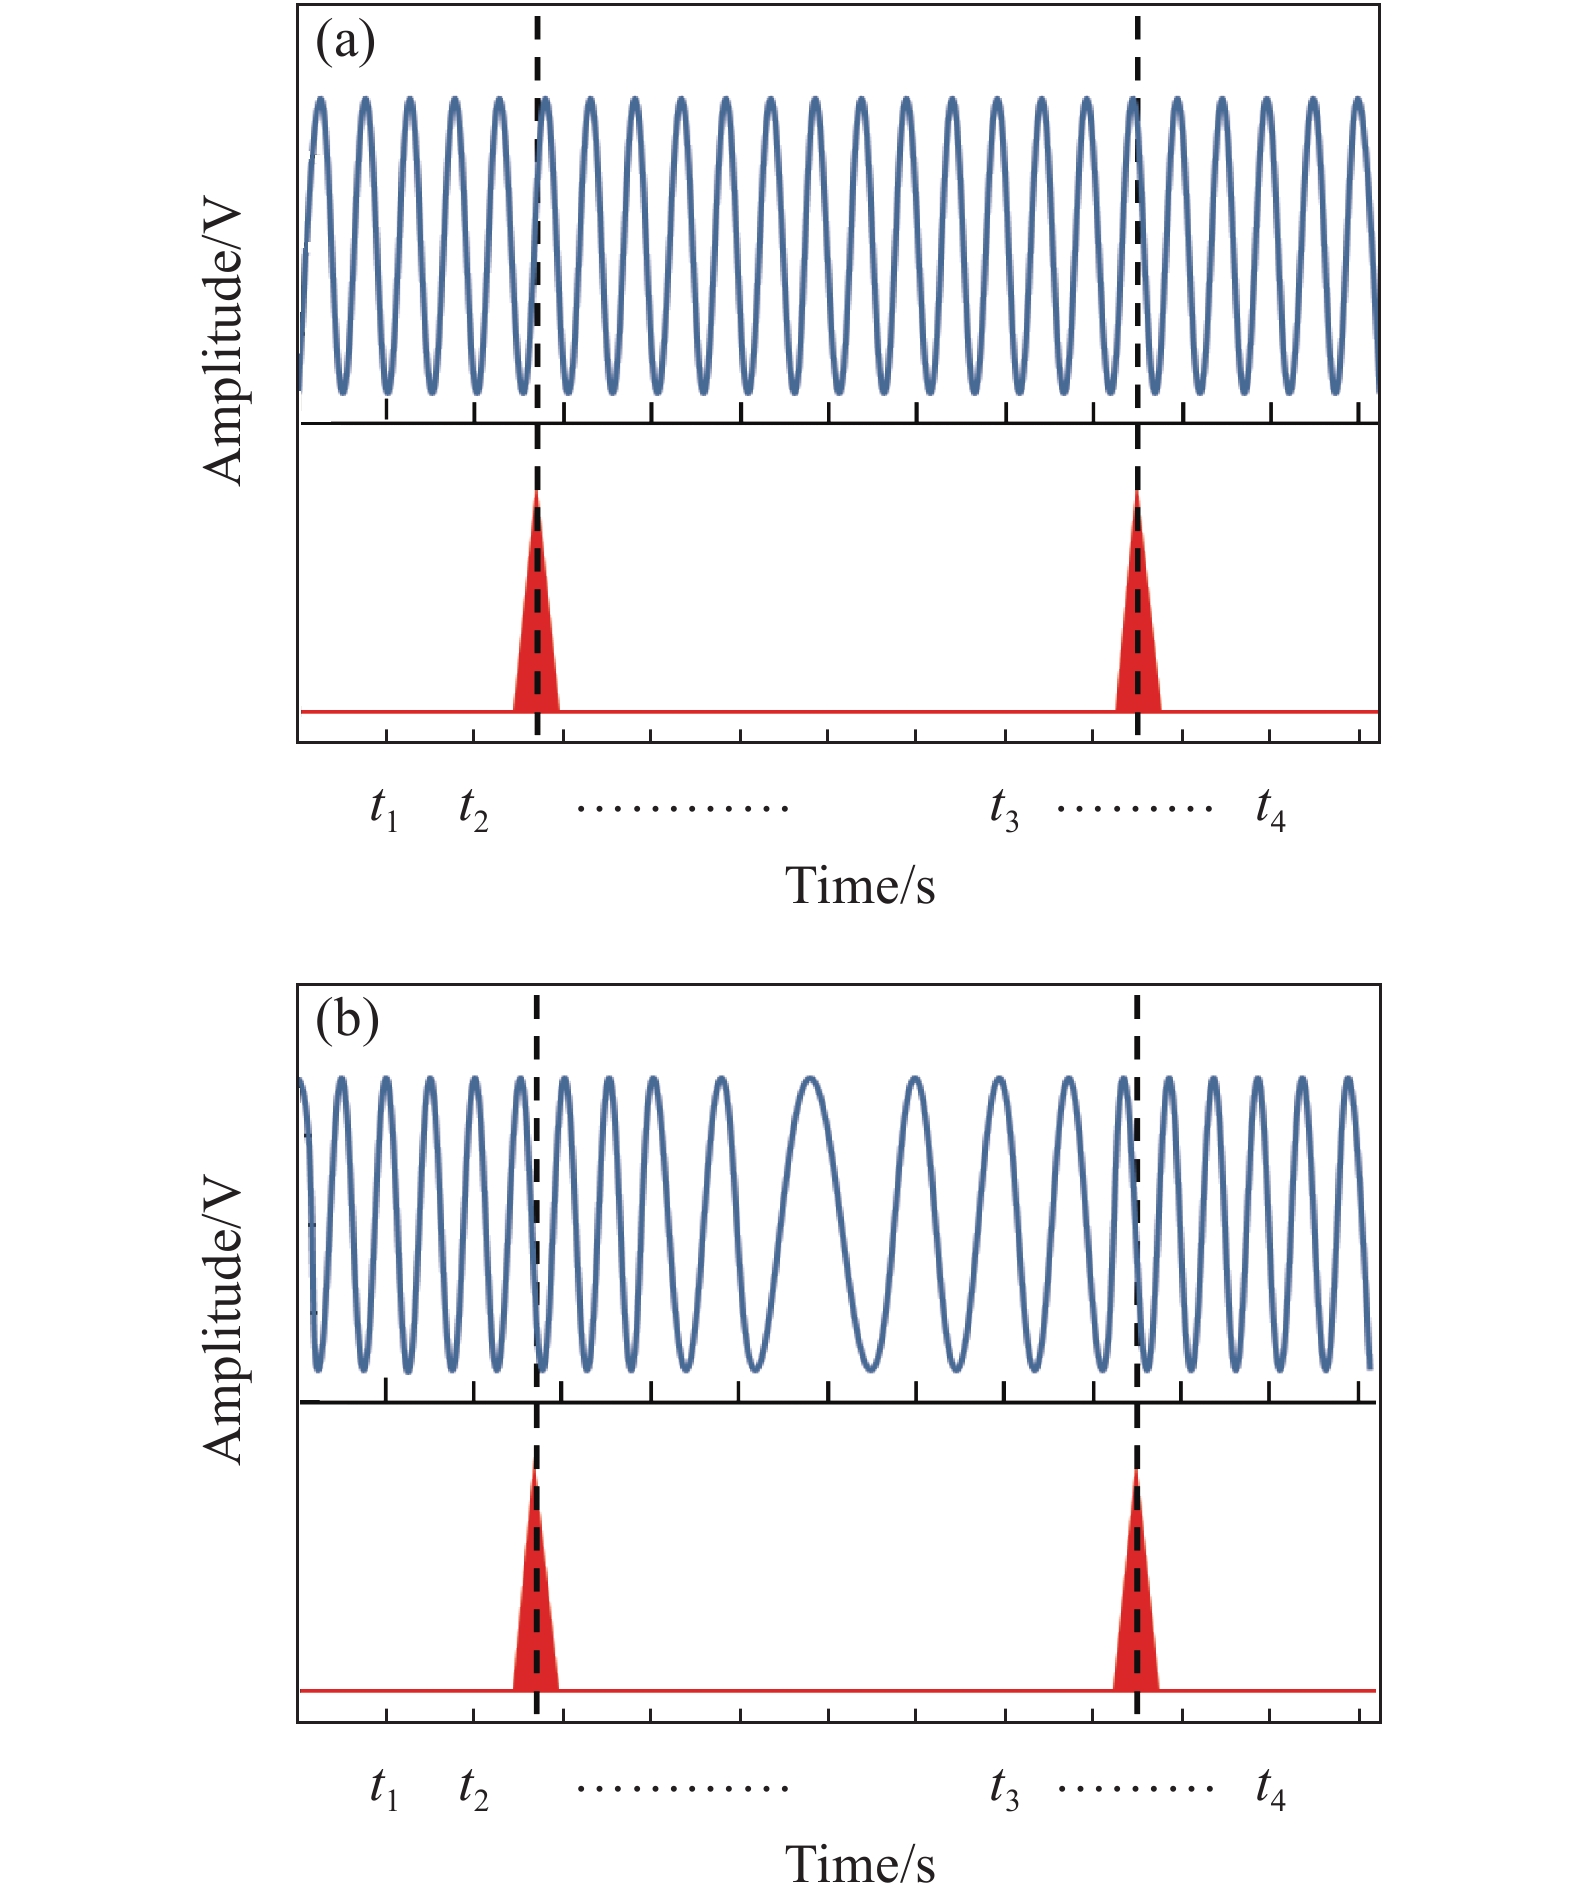 Schematic diagram of calculating the interference signal phase difference. (a) Ideal linear frequency sweeping; (b) Actual nonlinear frequency sweeping